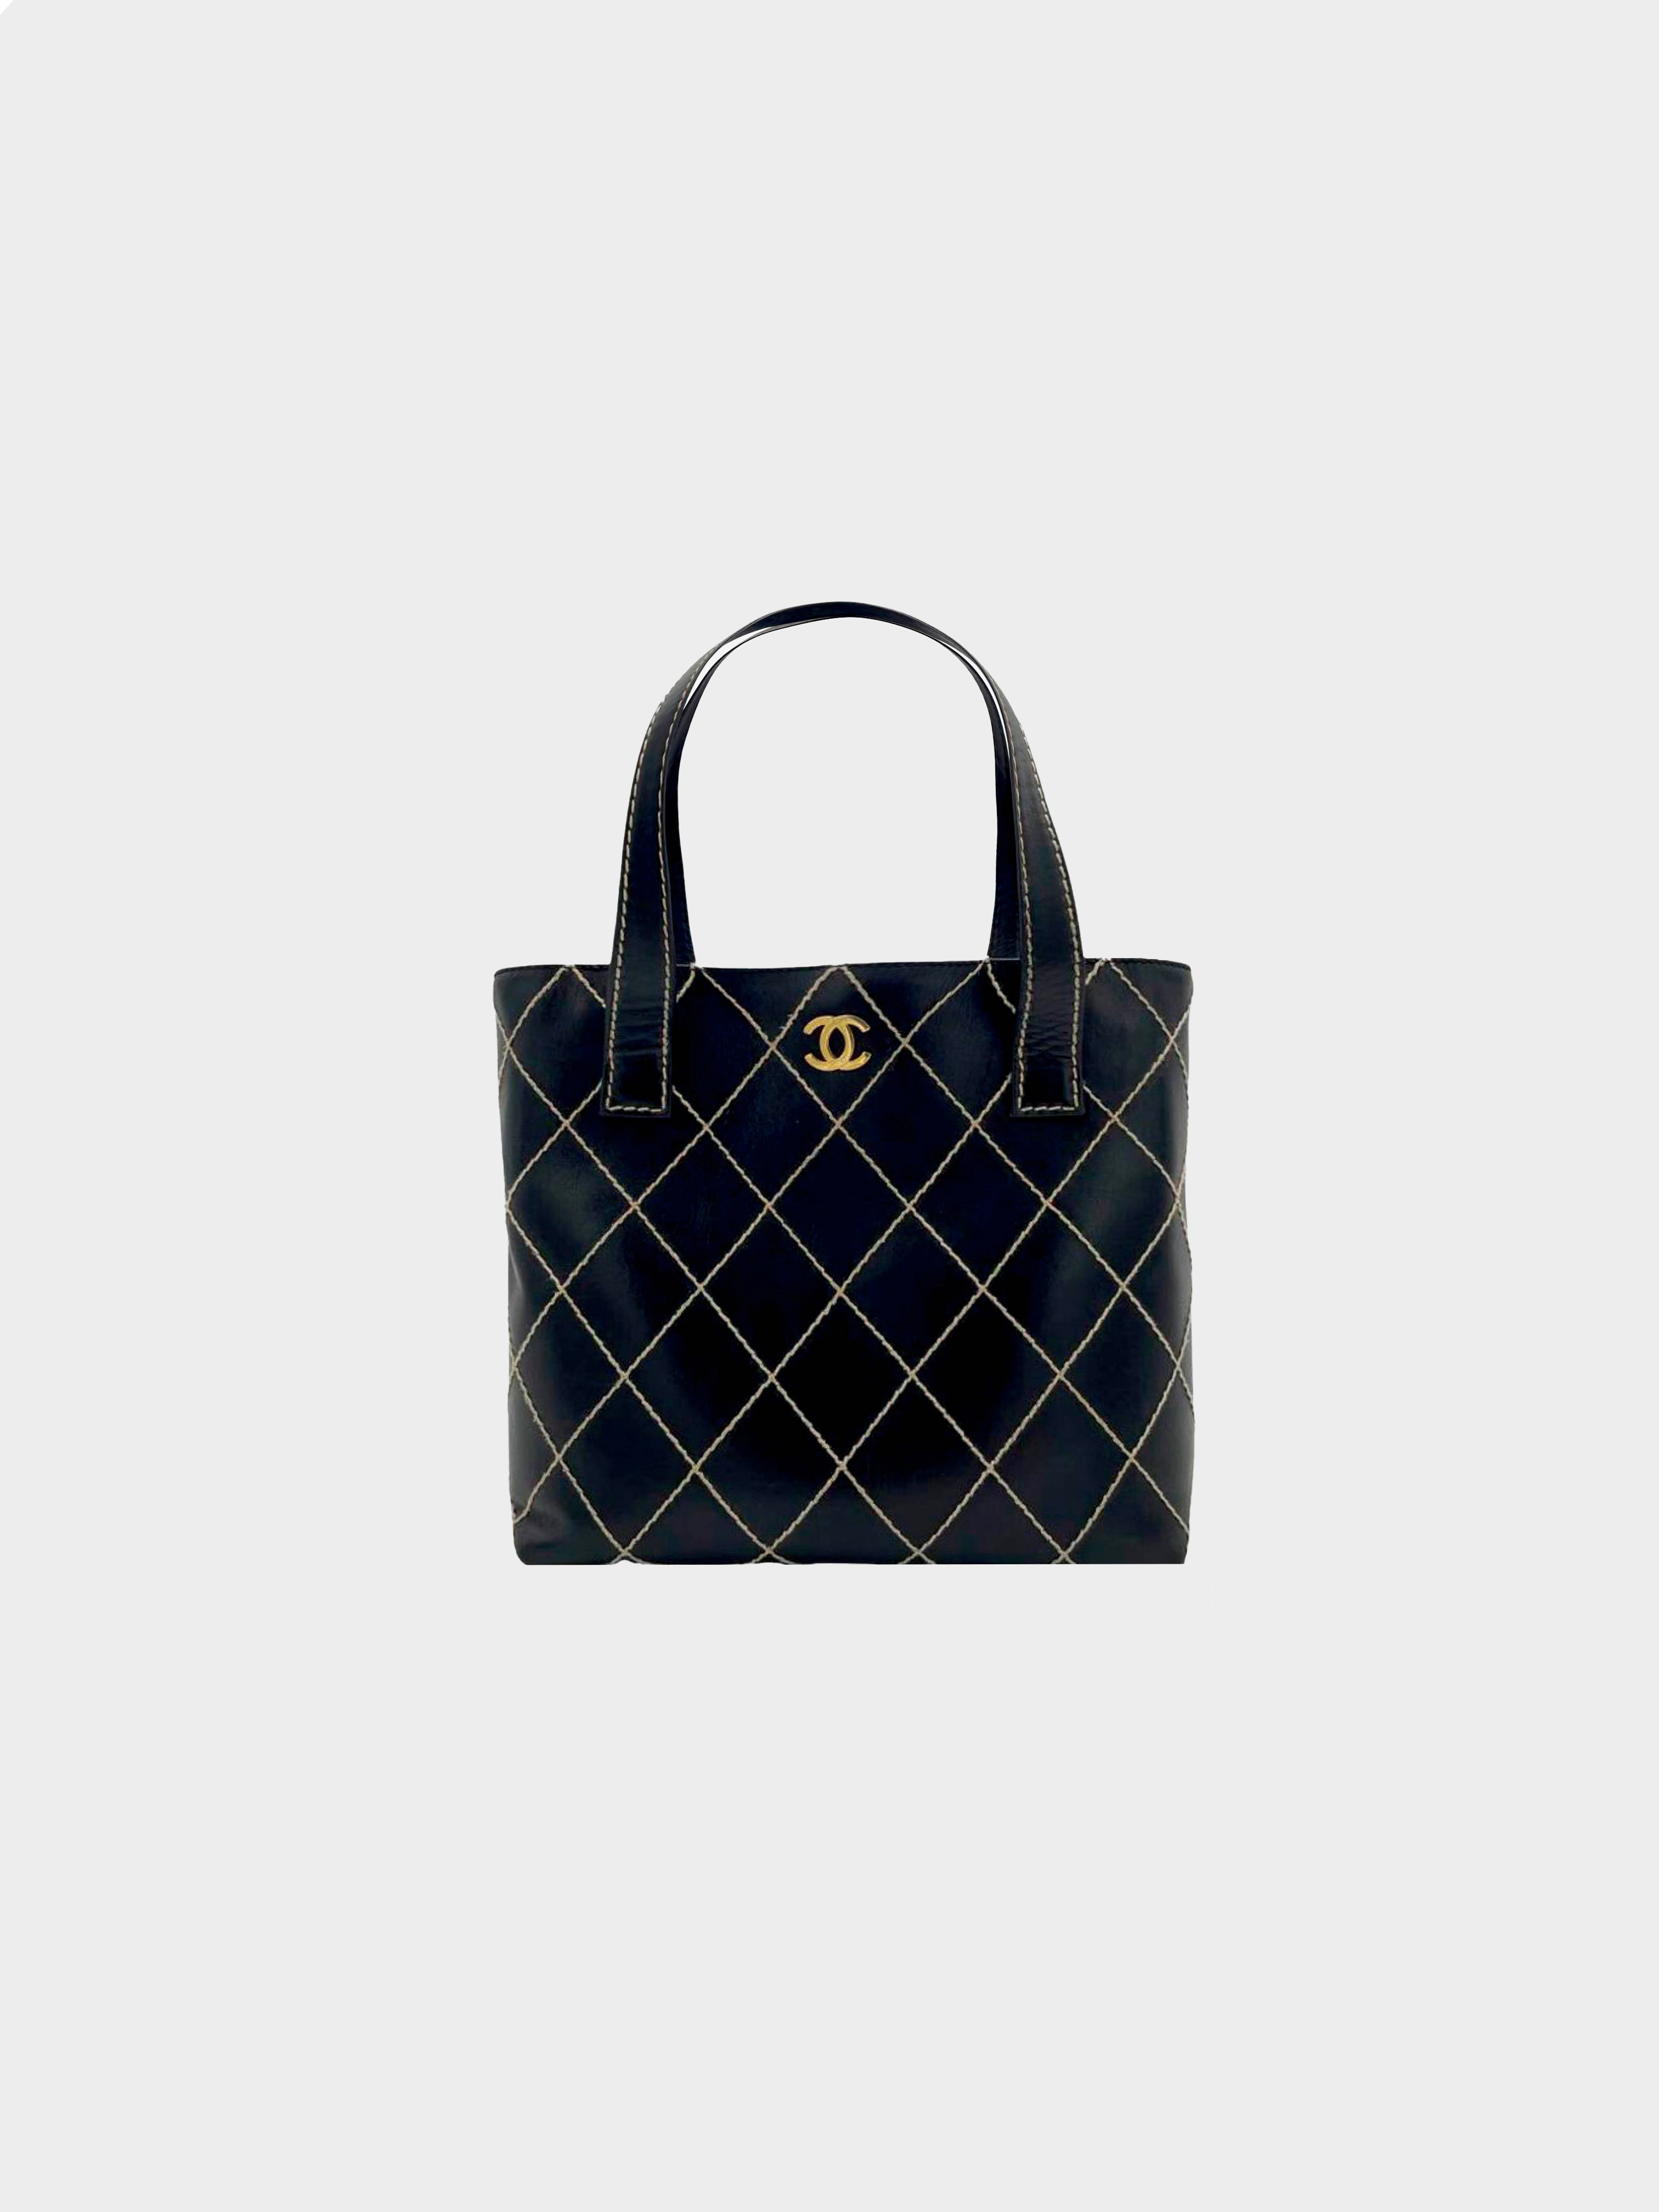 Chanel 2000s Cross Stitch Leather Bag